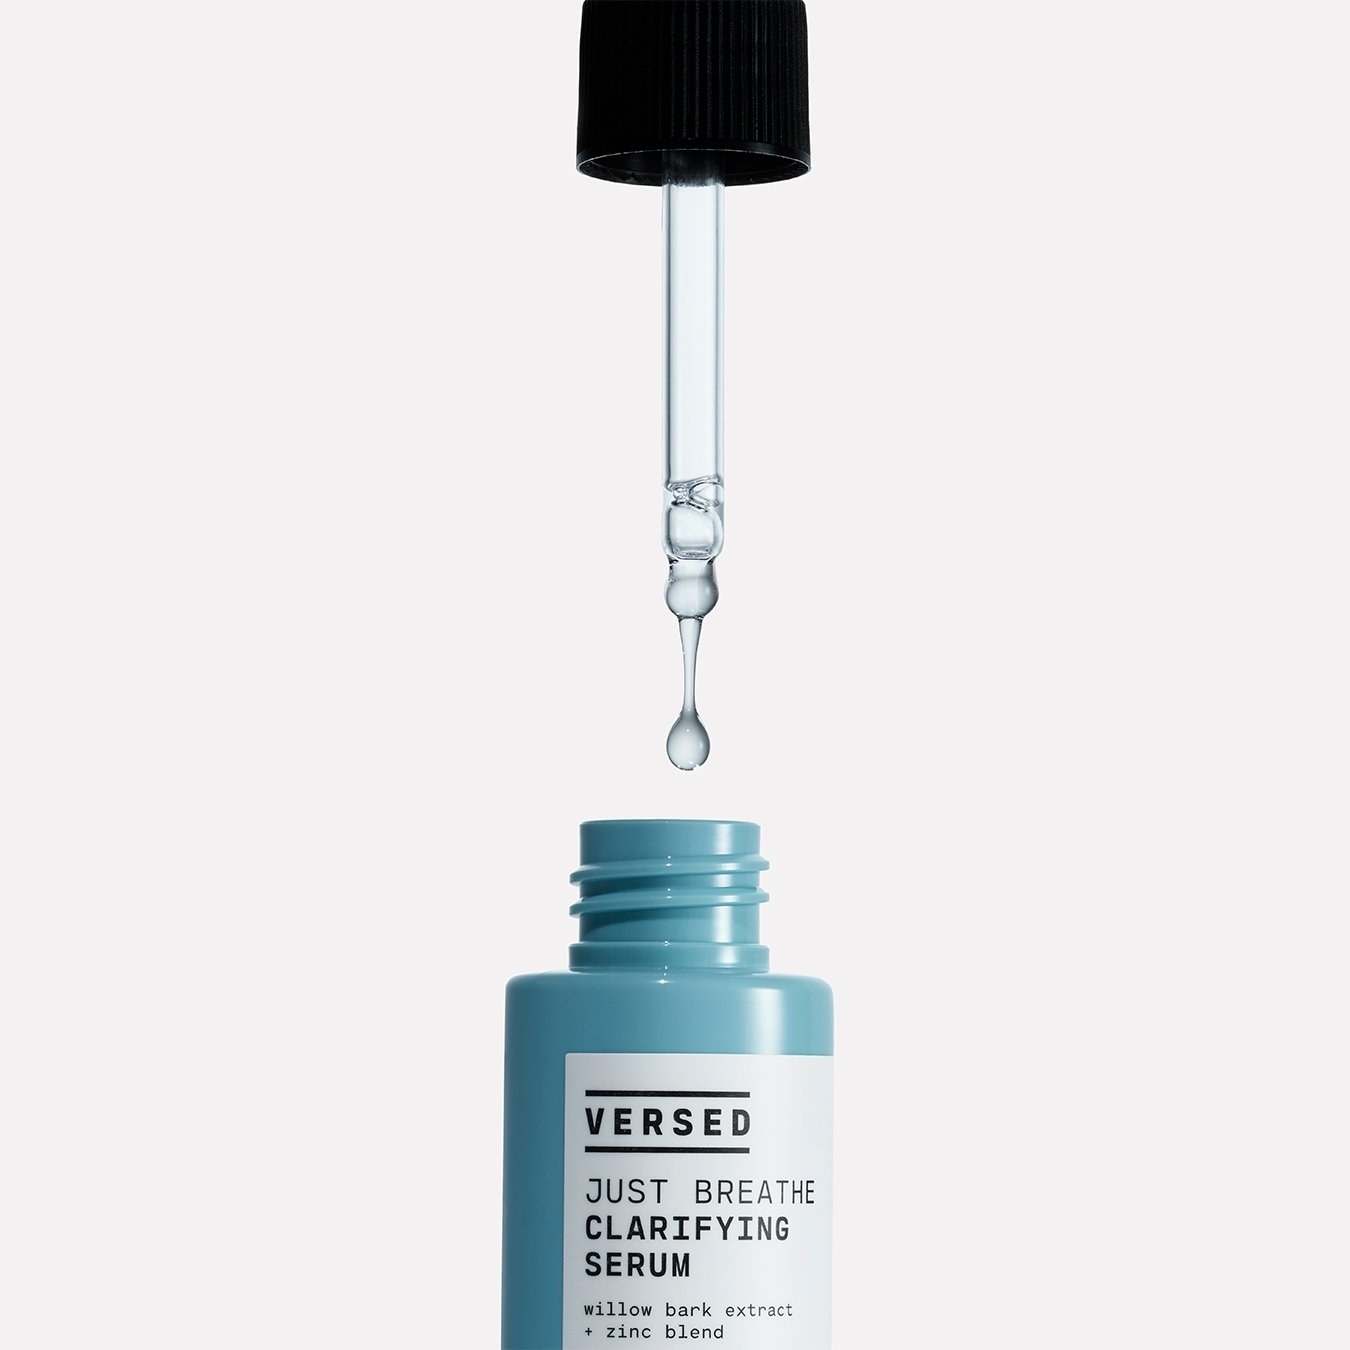 The dropper-style bottle of serum